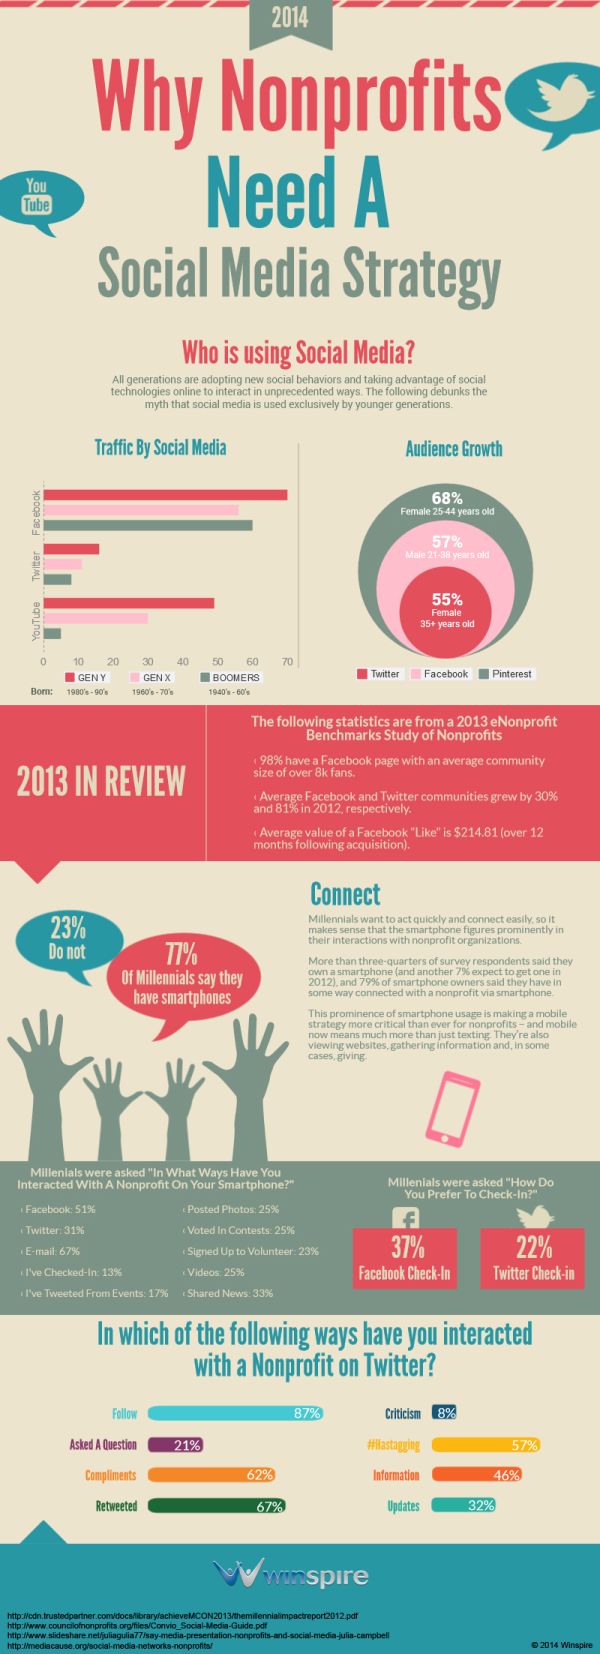 Infographic of the Week: Why Nonprofits Need A Social Media Strategy